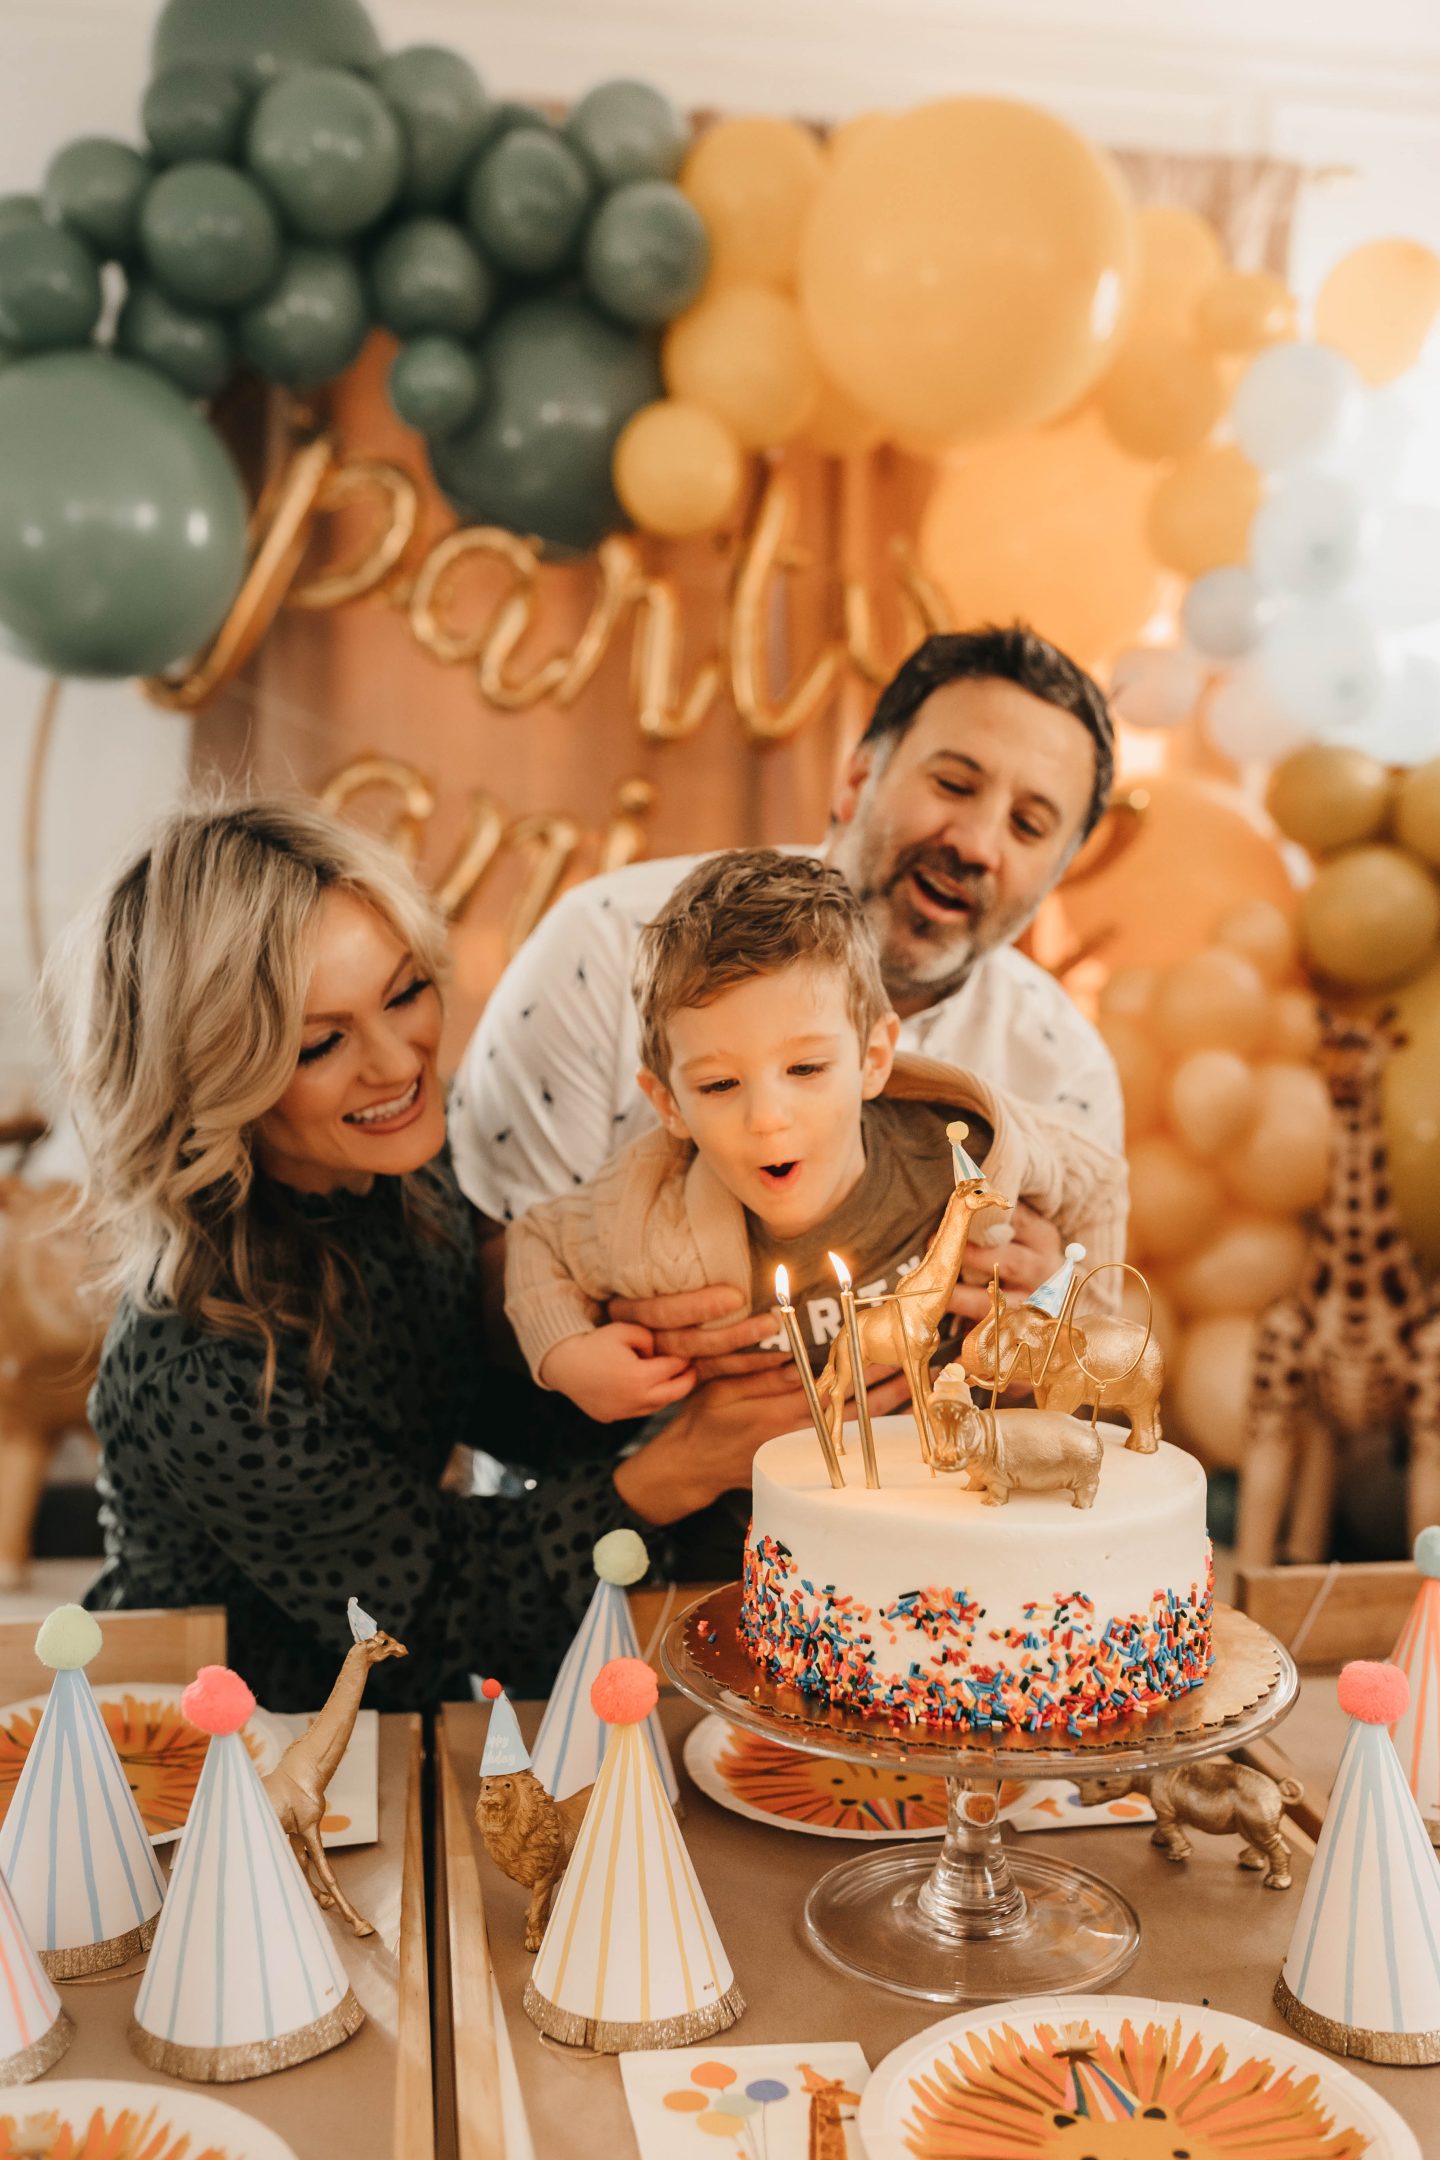 Calling all Party Animals for a Two Year Old Birthday Soiree